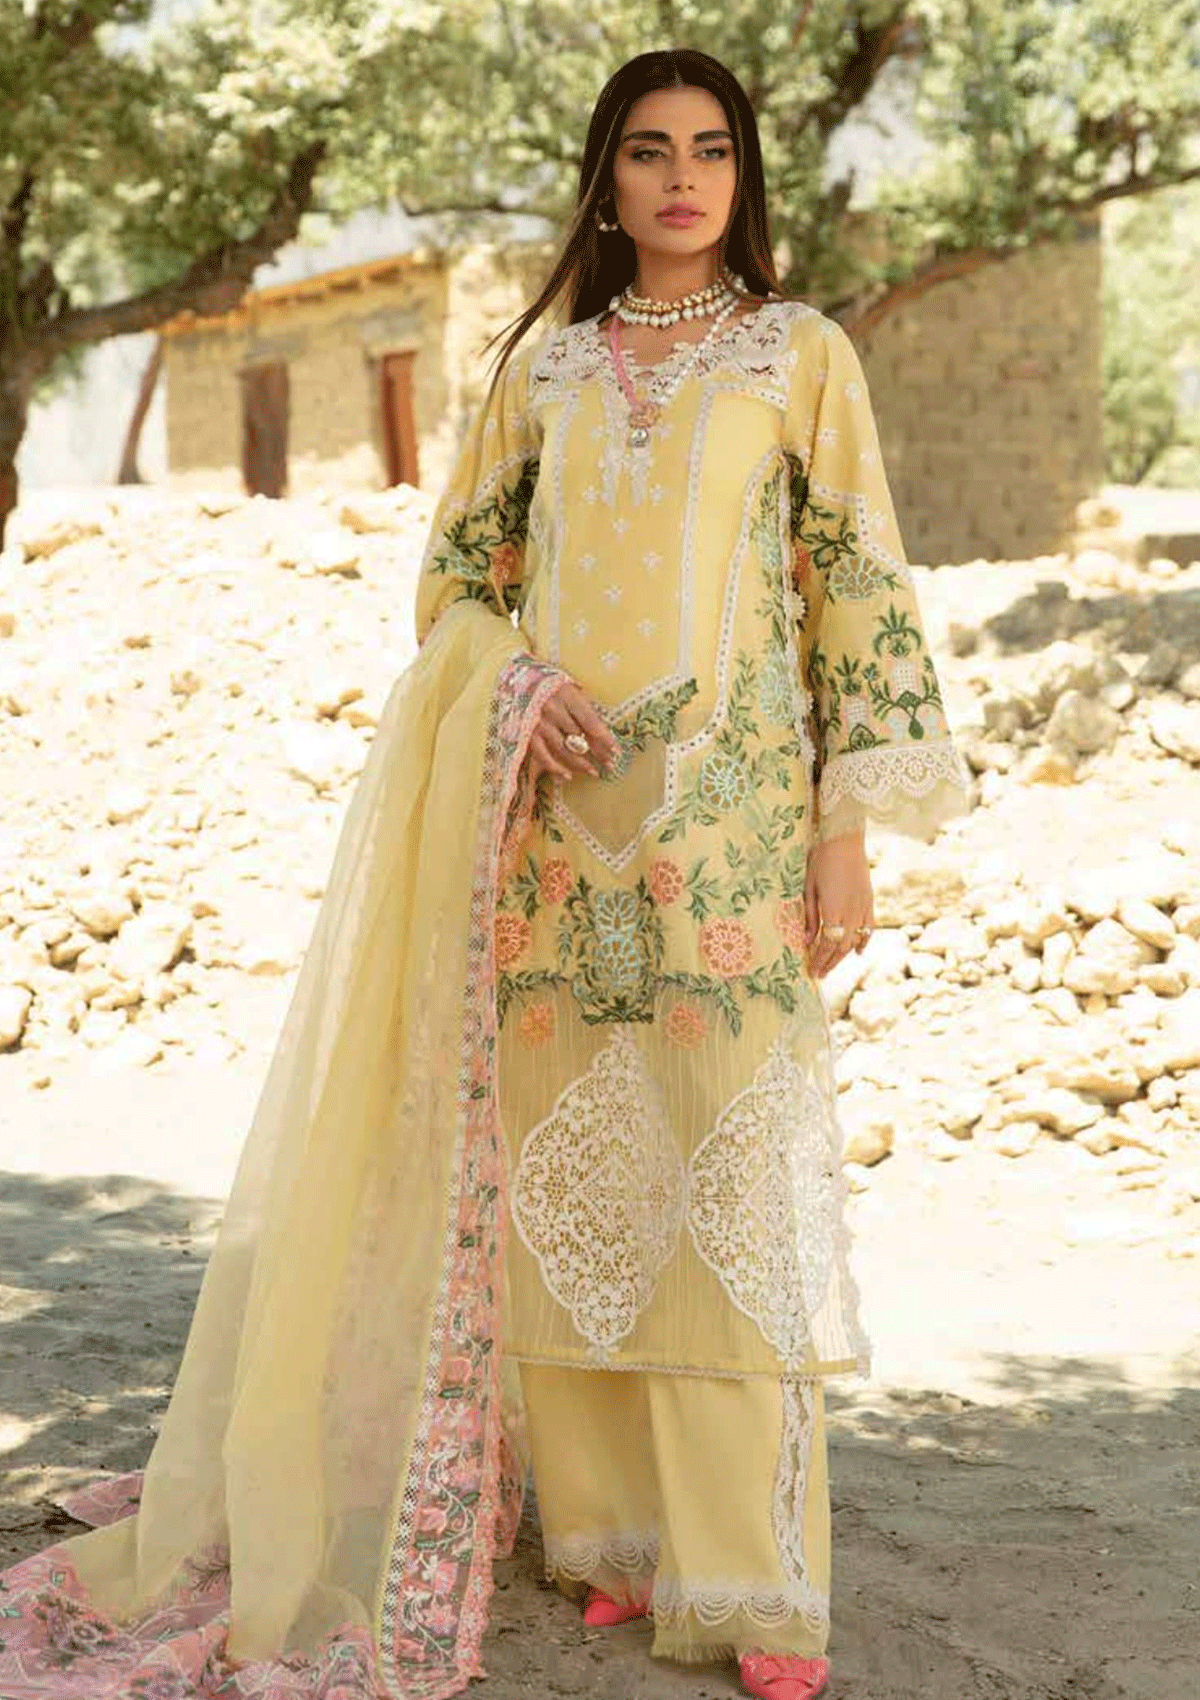 Shop Now, Summer - Luxury Lawn 2023 - Vol.2 - Maryam Hussain - Shahana Collection UK - Wedding and Bridal Party Dresses 